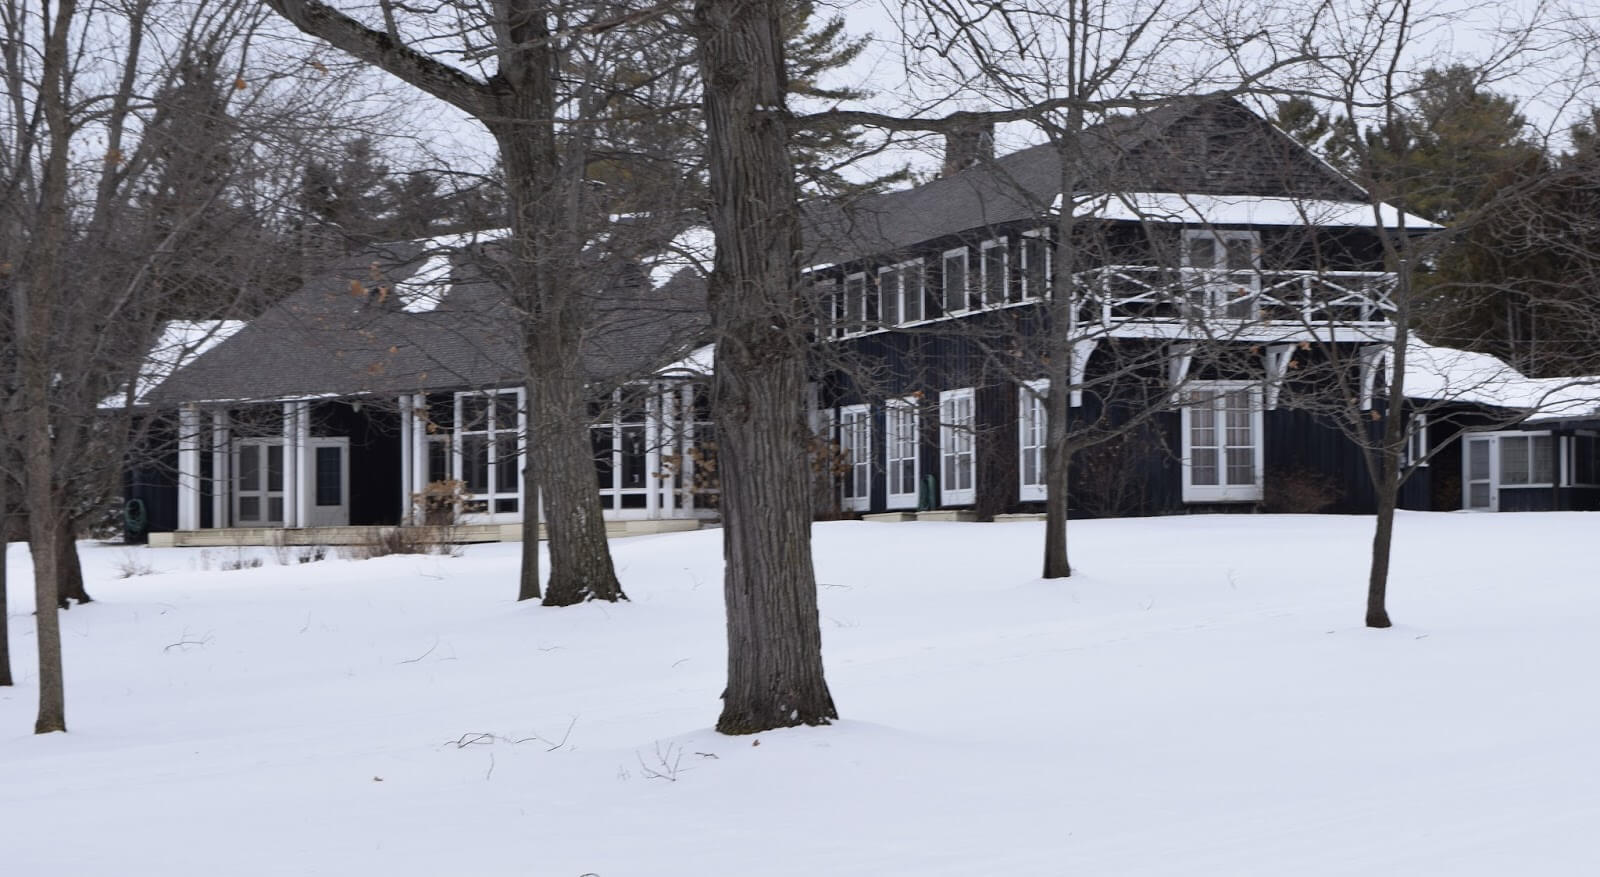 A very large cottage of the Edwardian era in Sturgeon Point on Lake Avenue in the winter